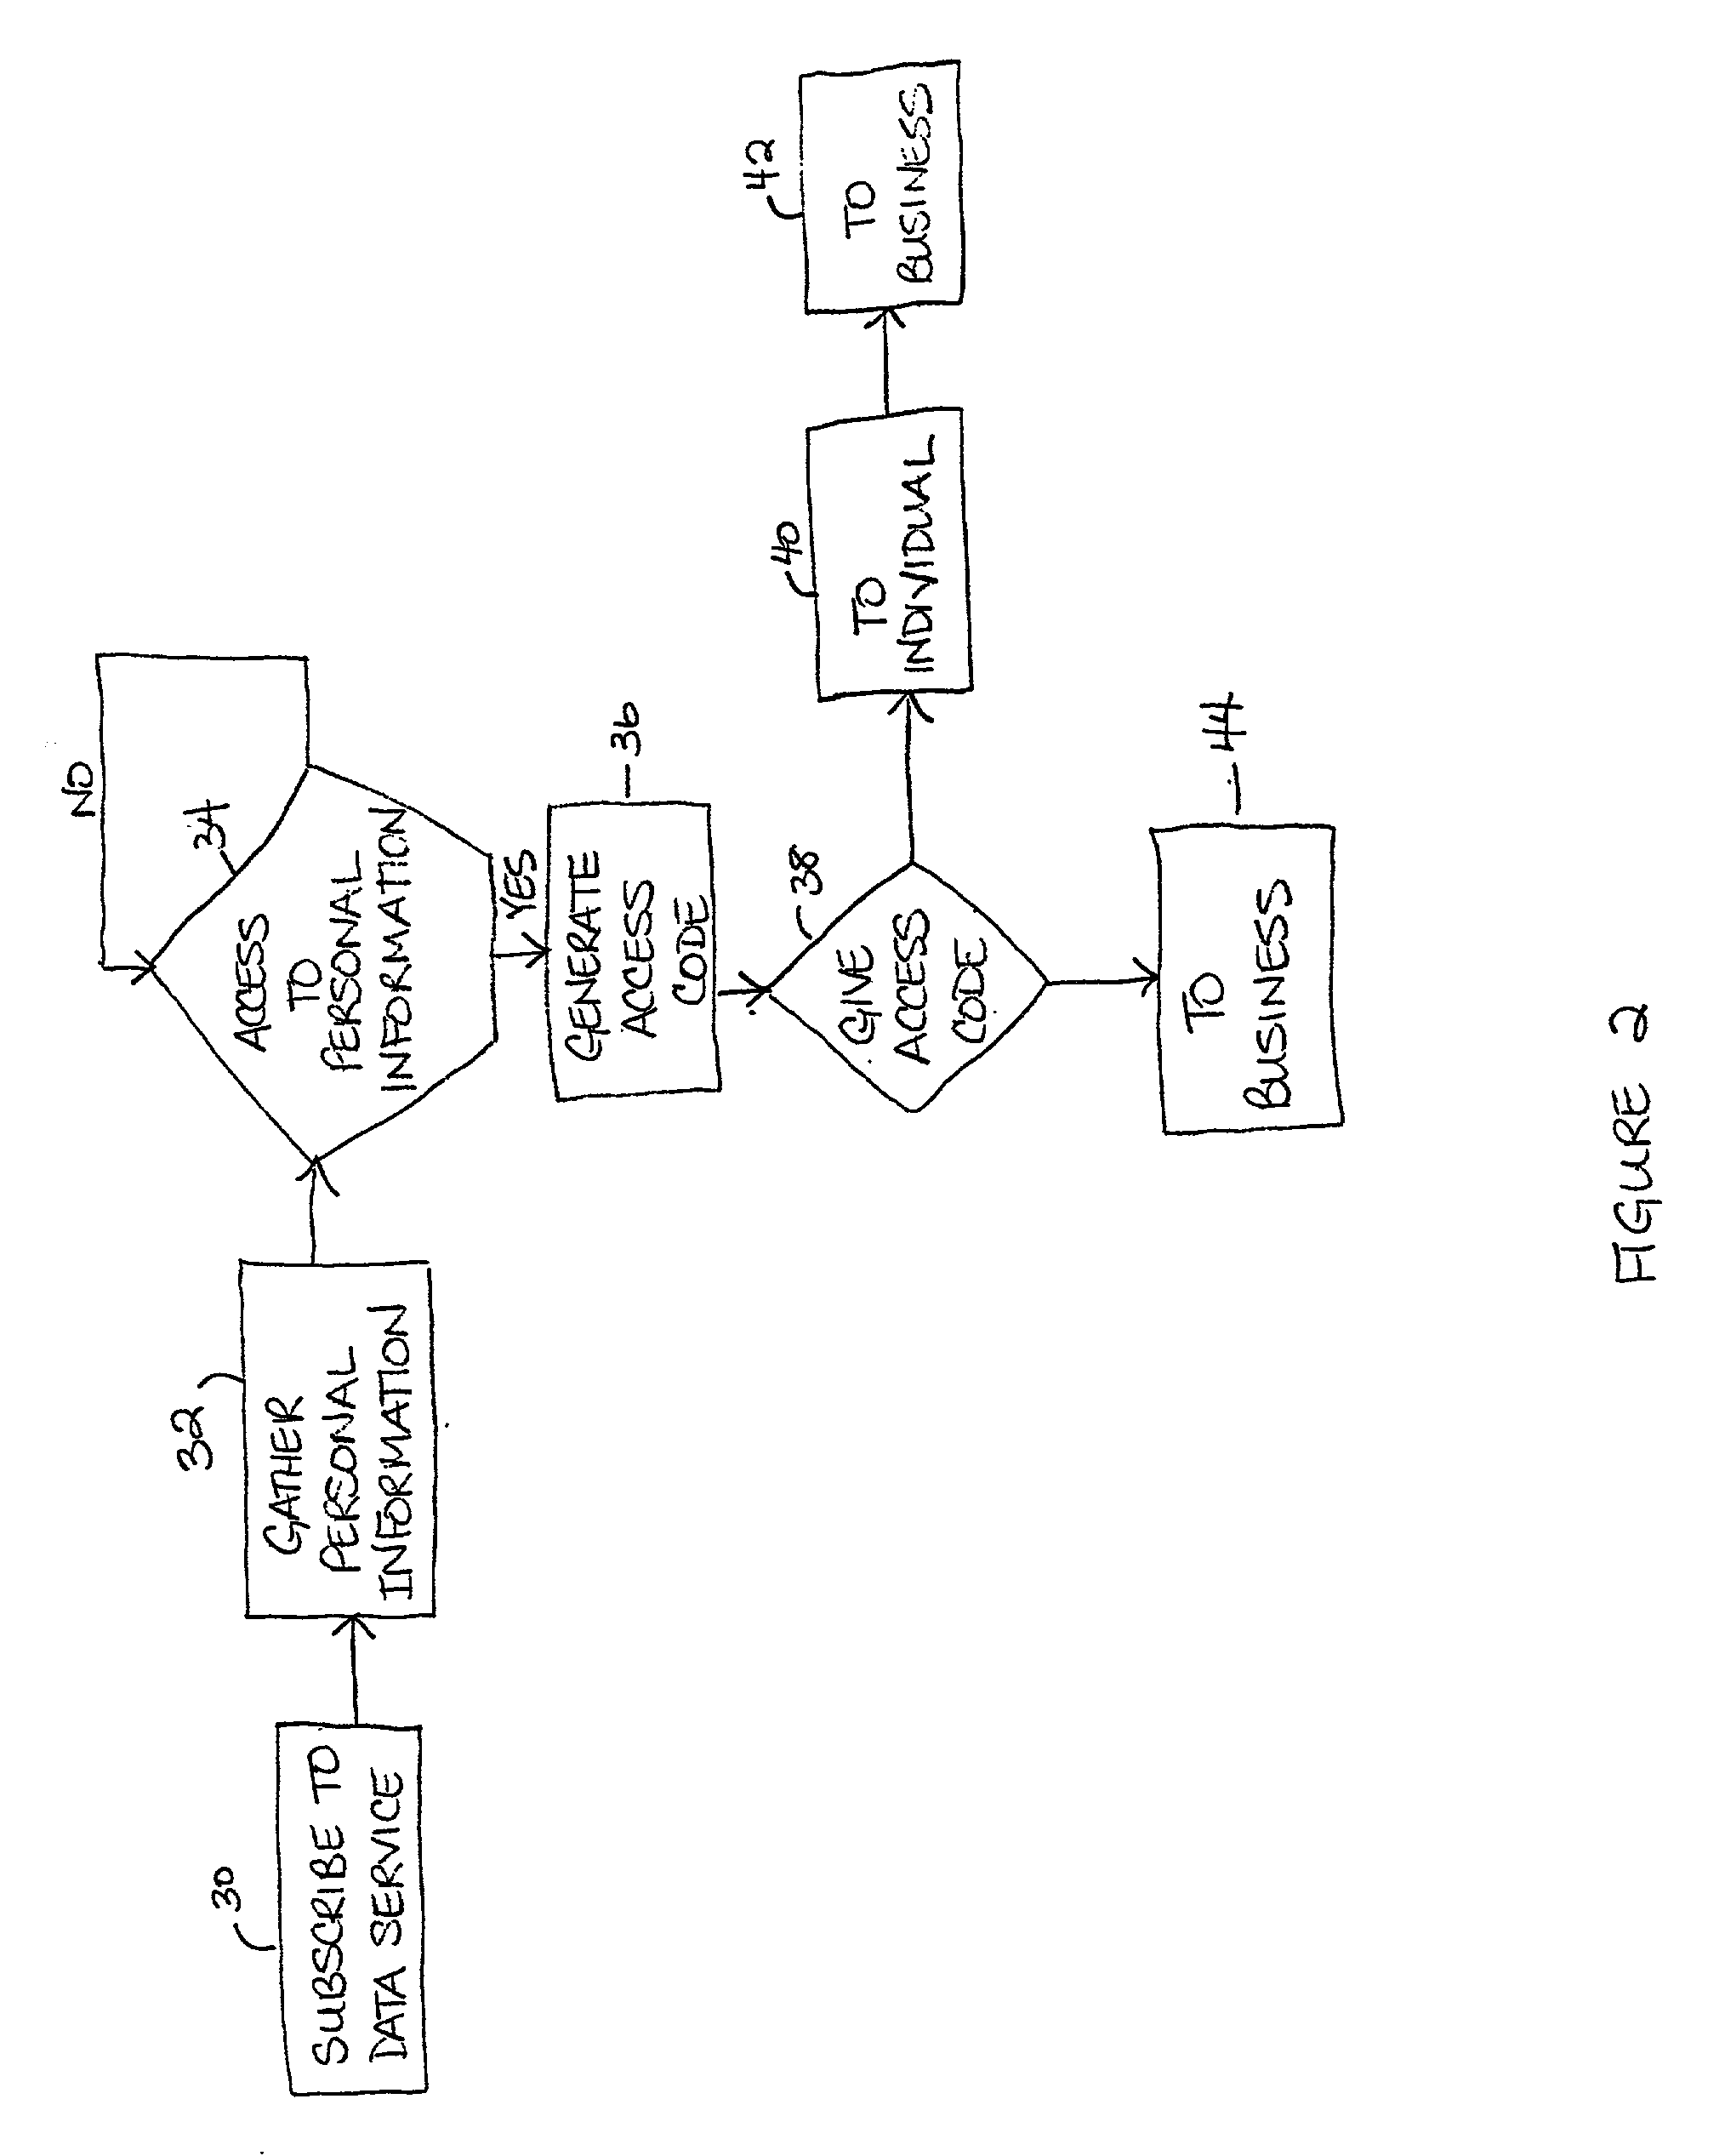 Method and system for a data service to control access to personal information